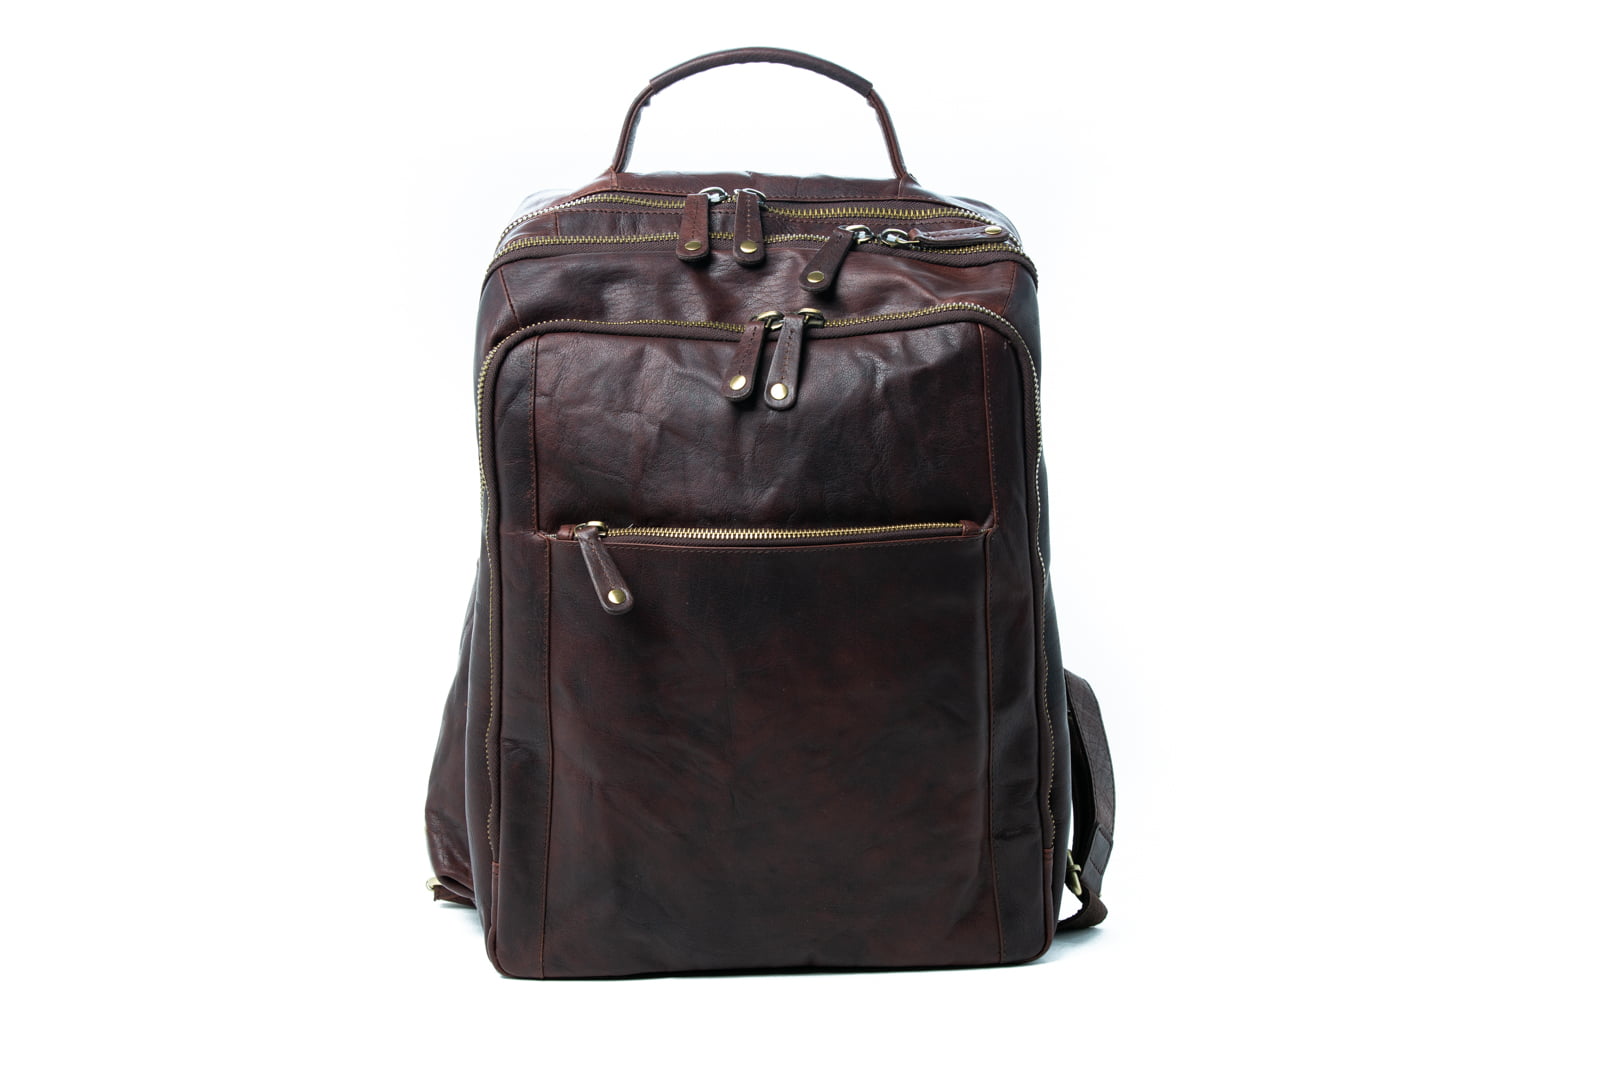 Oran - OB-794 Mike Large 3section Leather Laptop backpack - Brandy